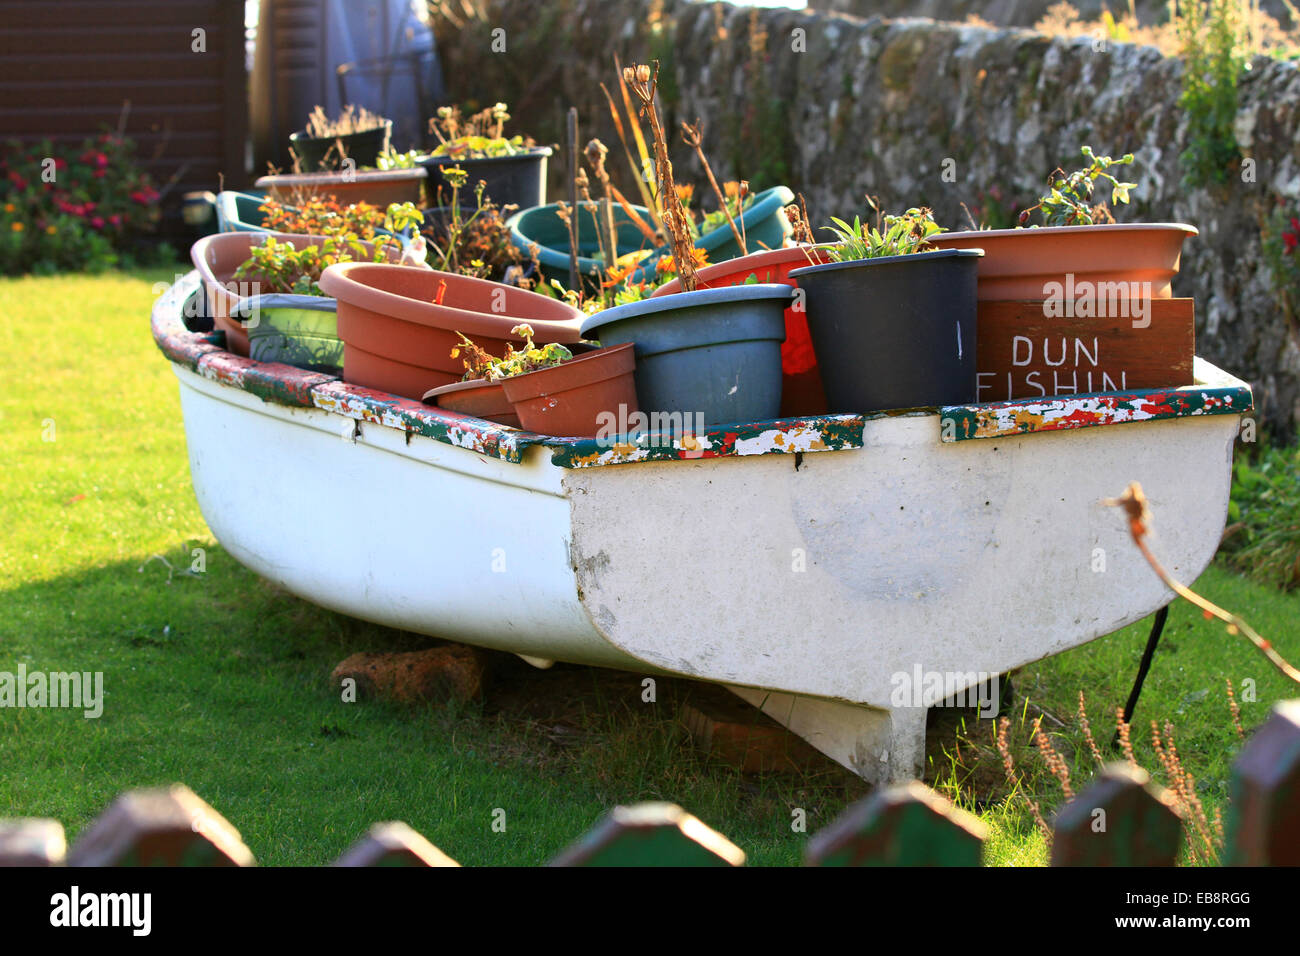 Old small sea fishing boat turned into a feature for plants in a garden on the Sottish Coast. Full of plastic plant pots. Stock Photo